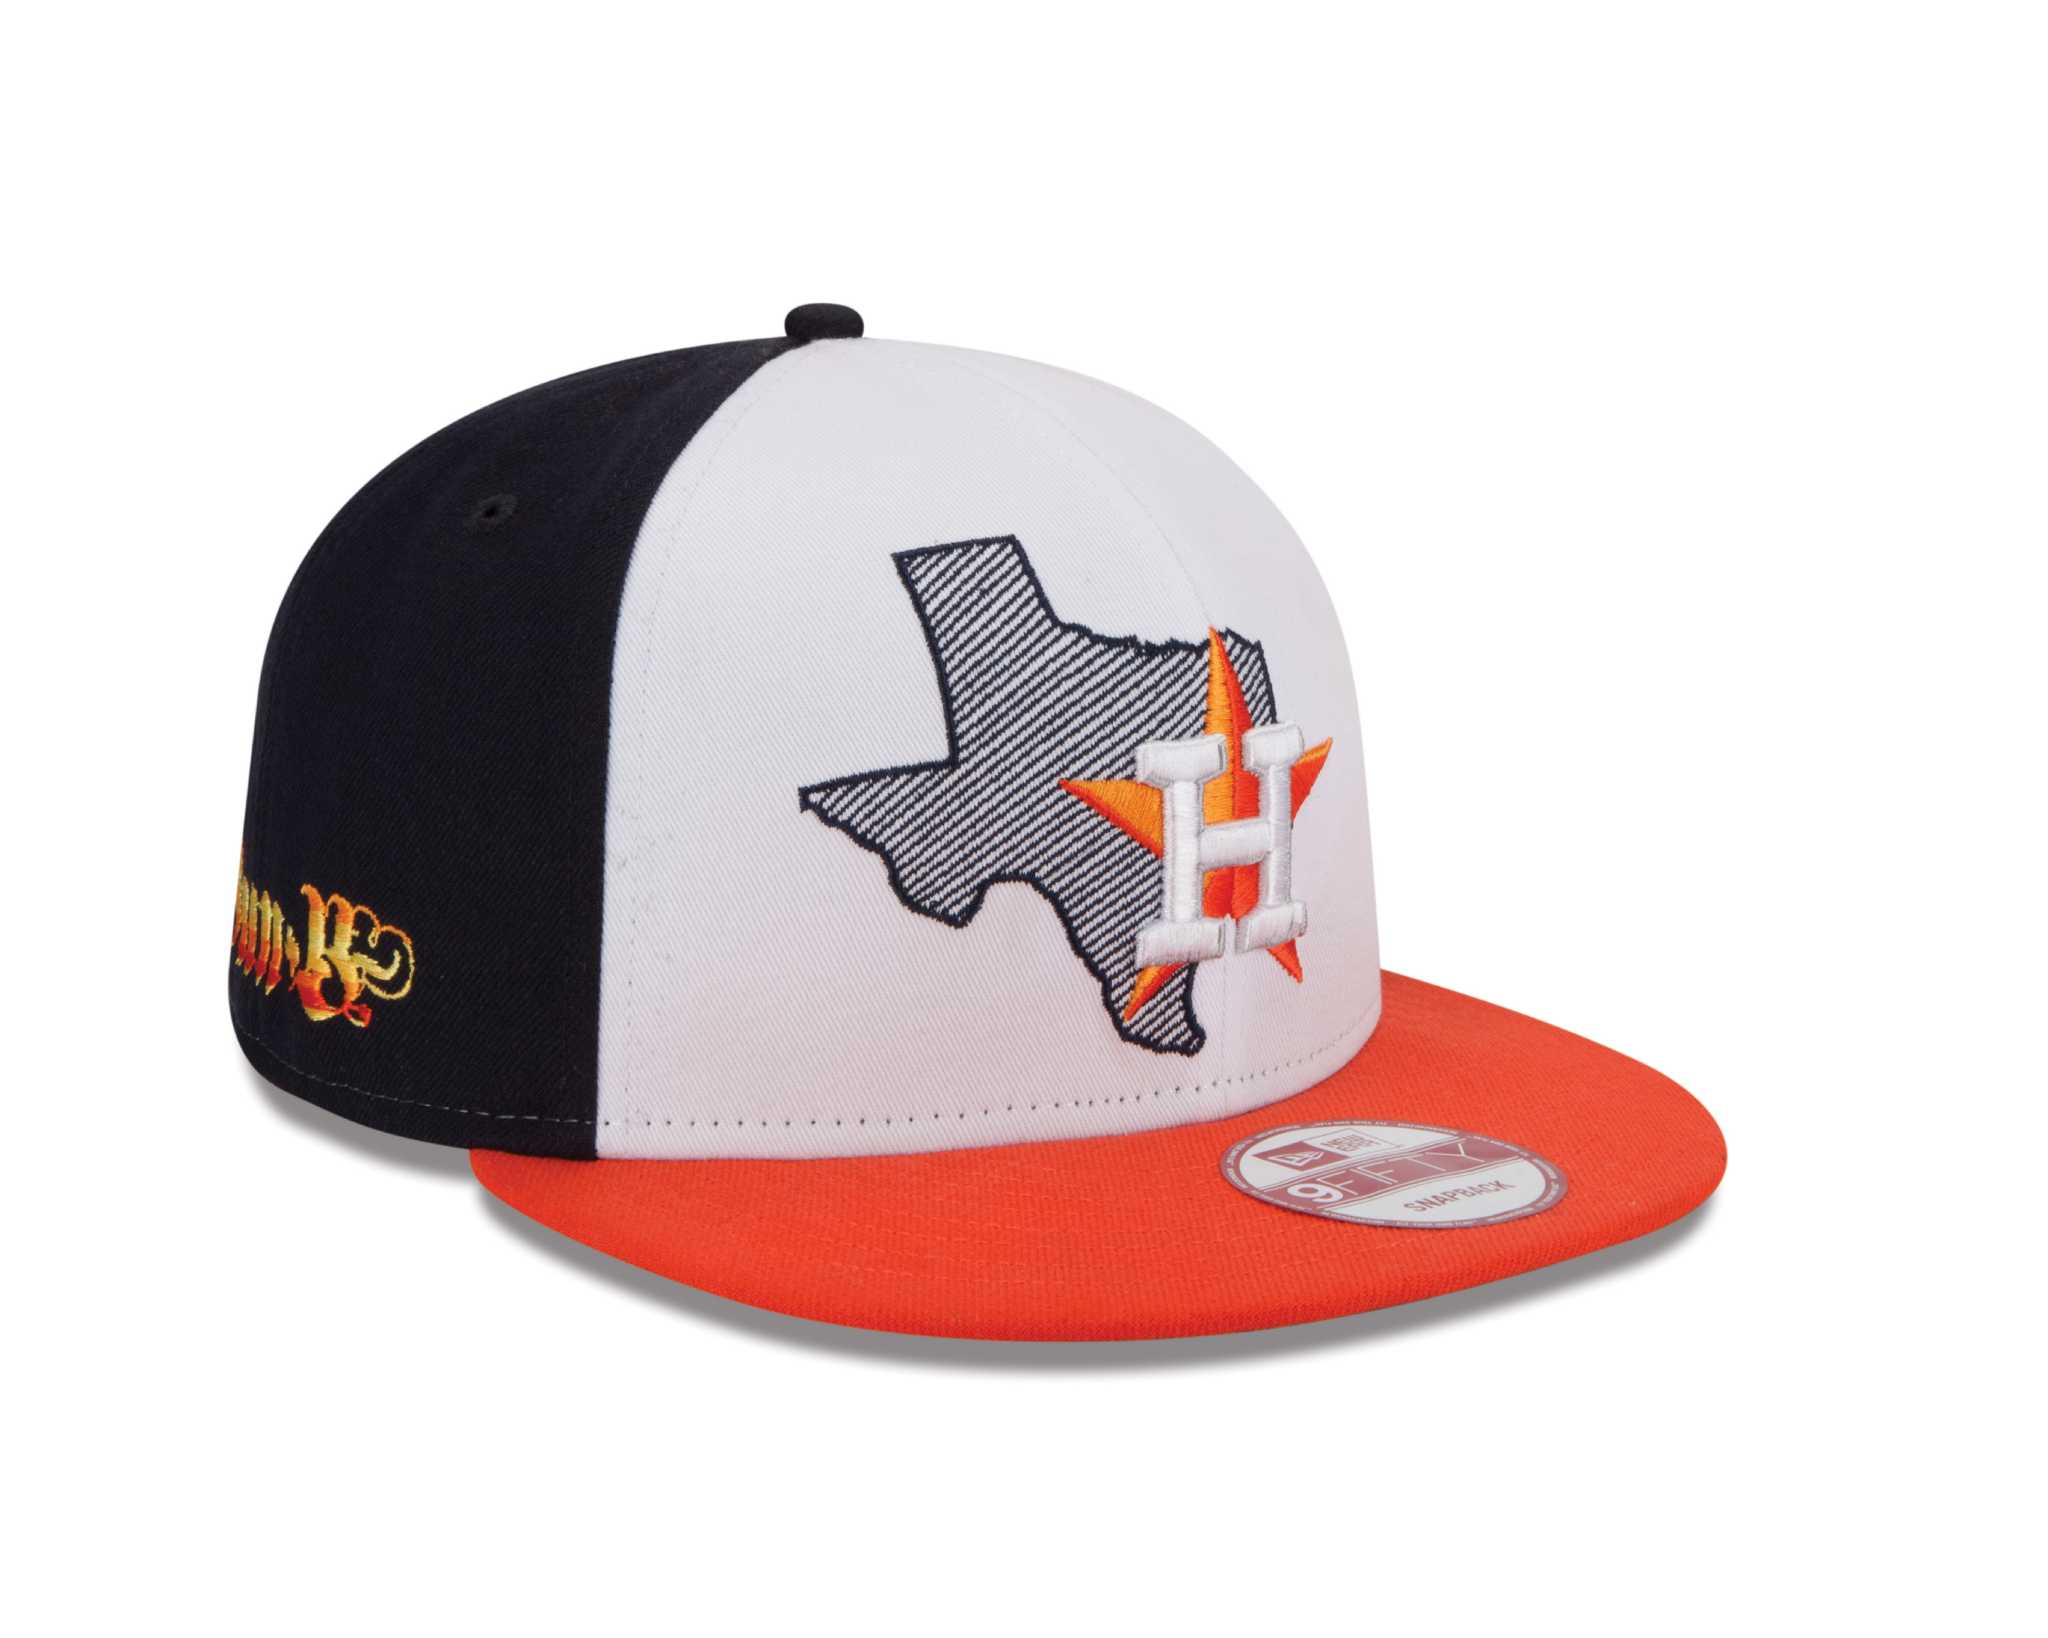 Bun B says 'we're all one' in Houston, unveils cap collection